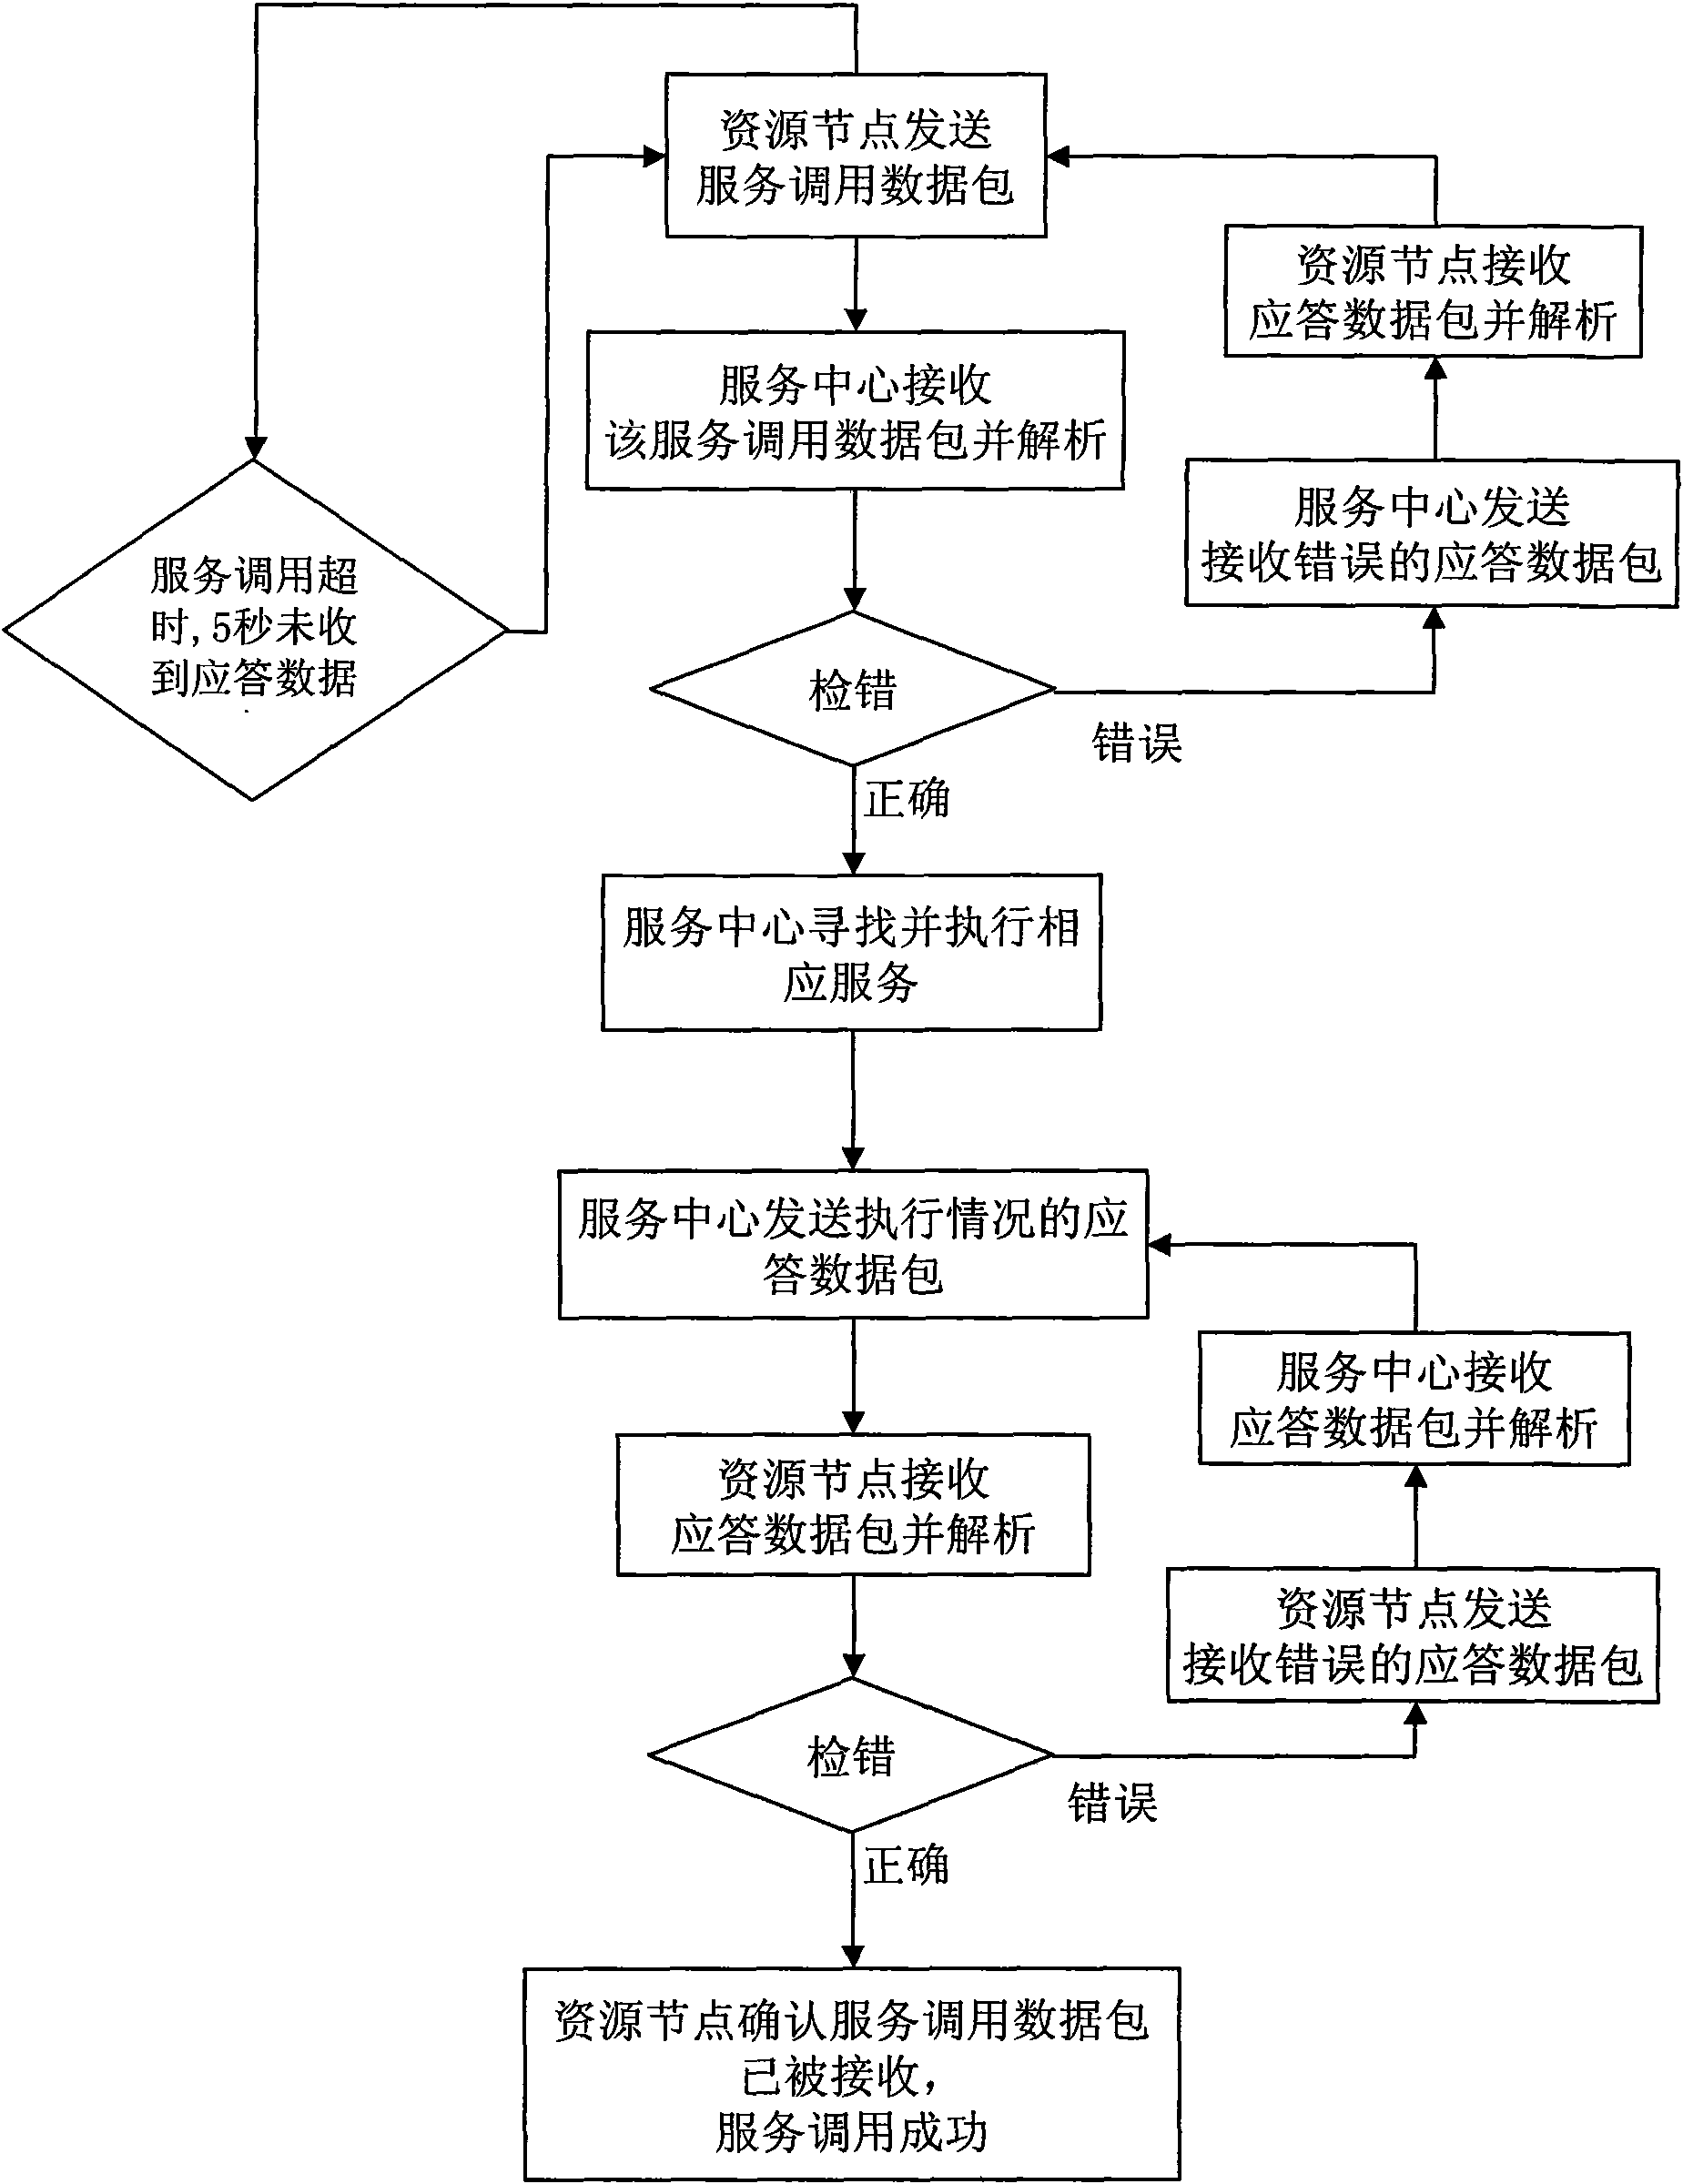 Communication method of manufacturing grid service center and resource nodes